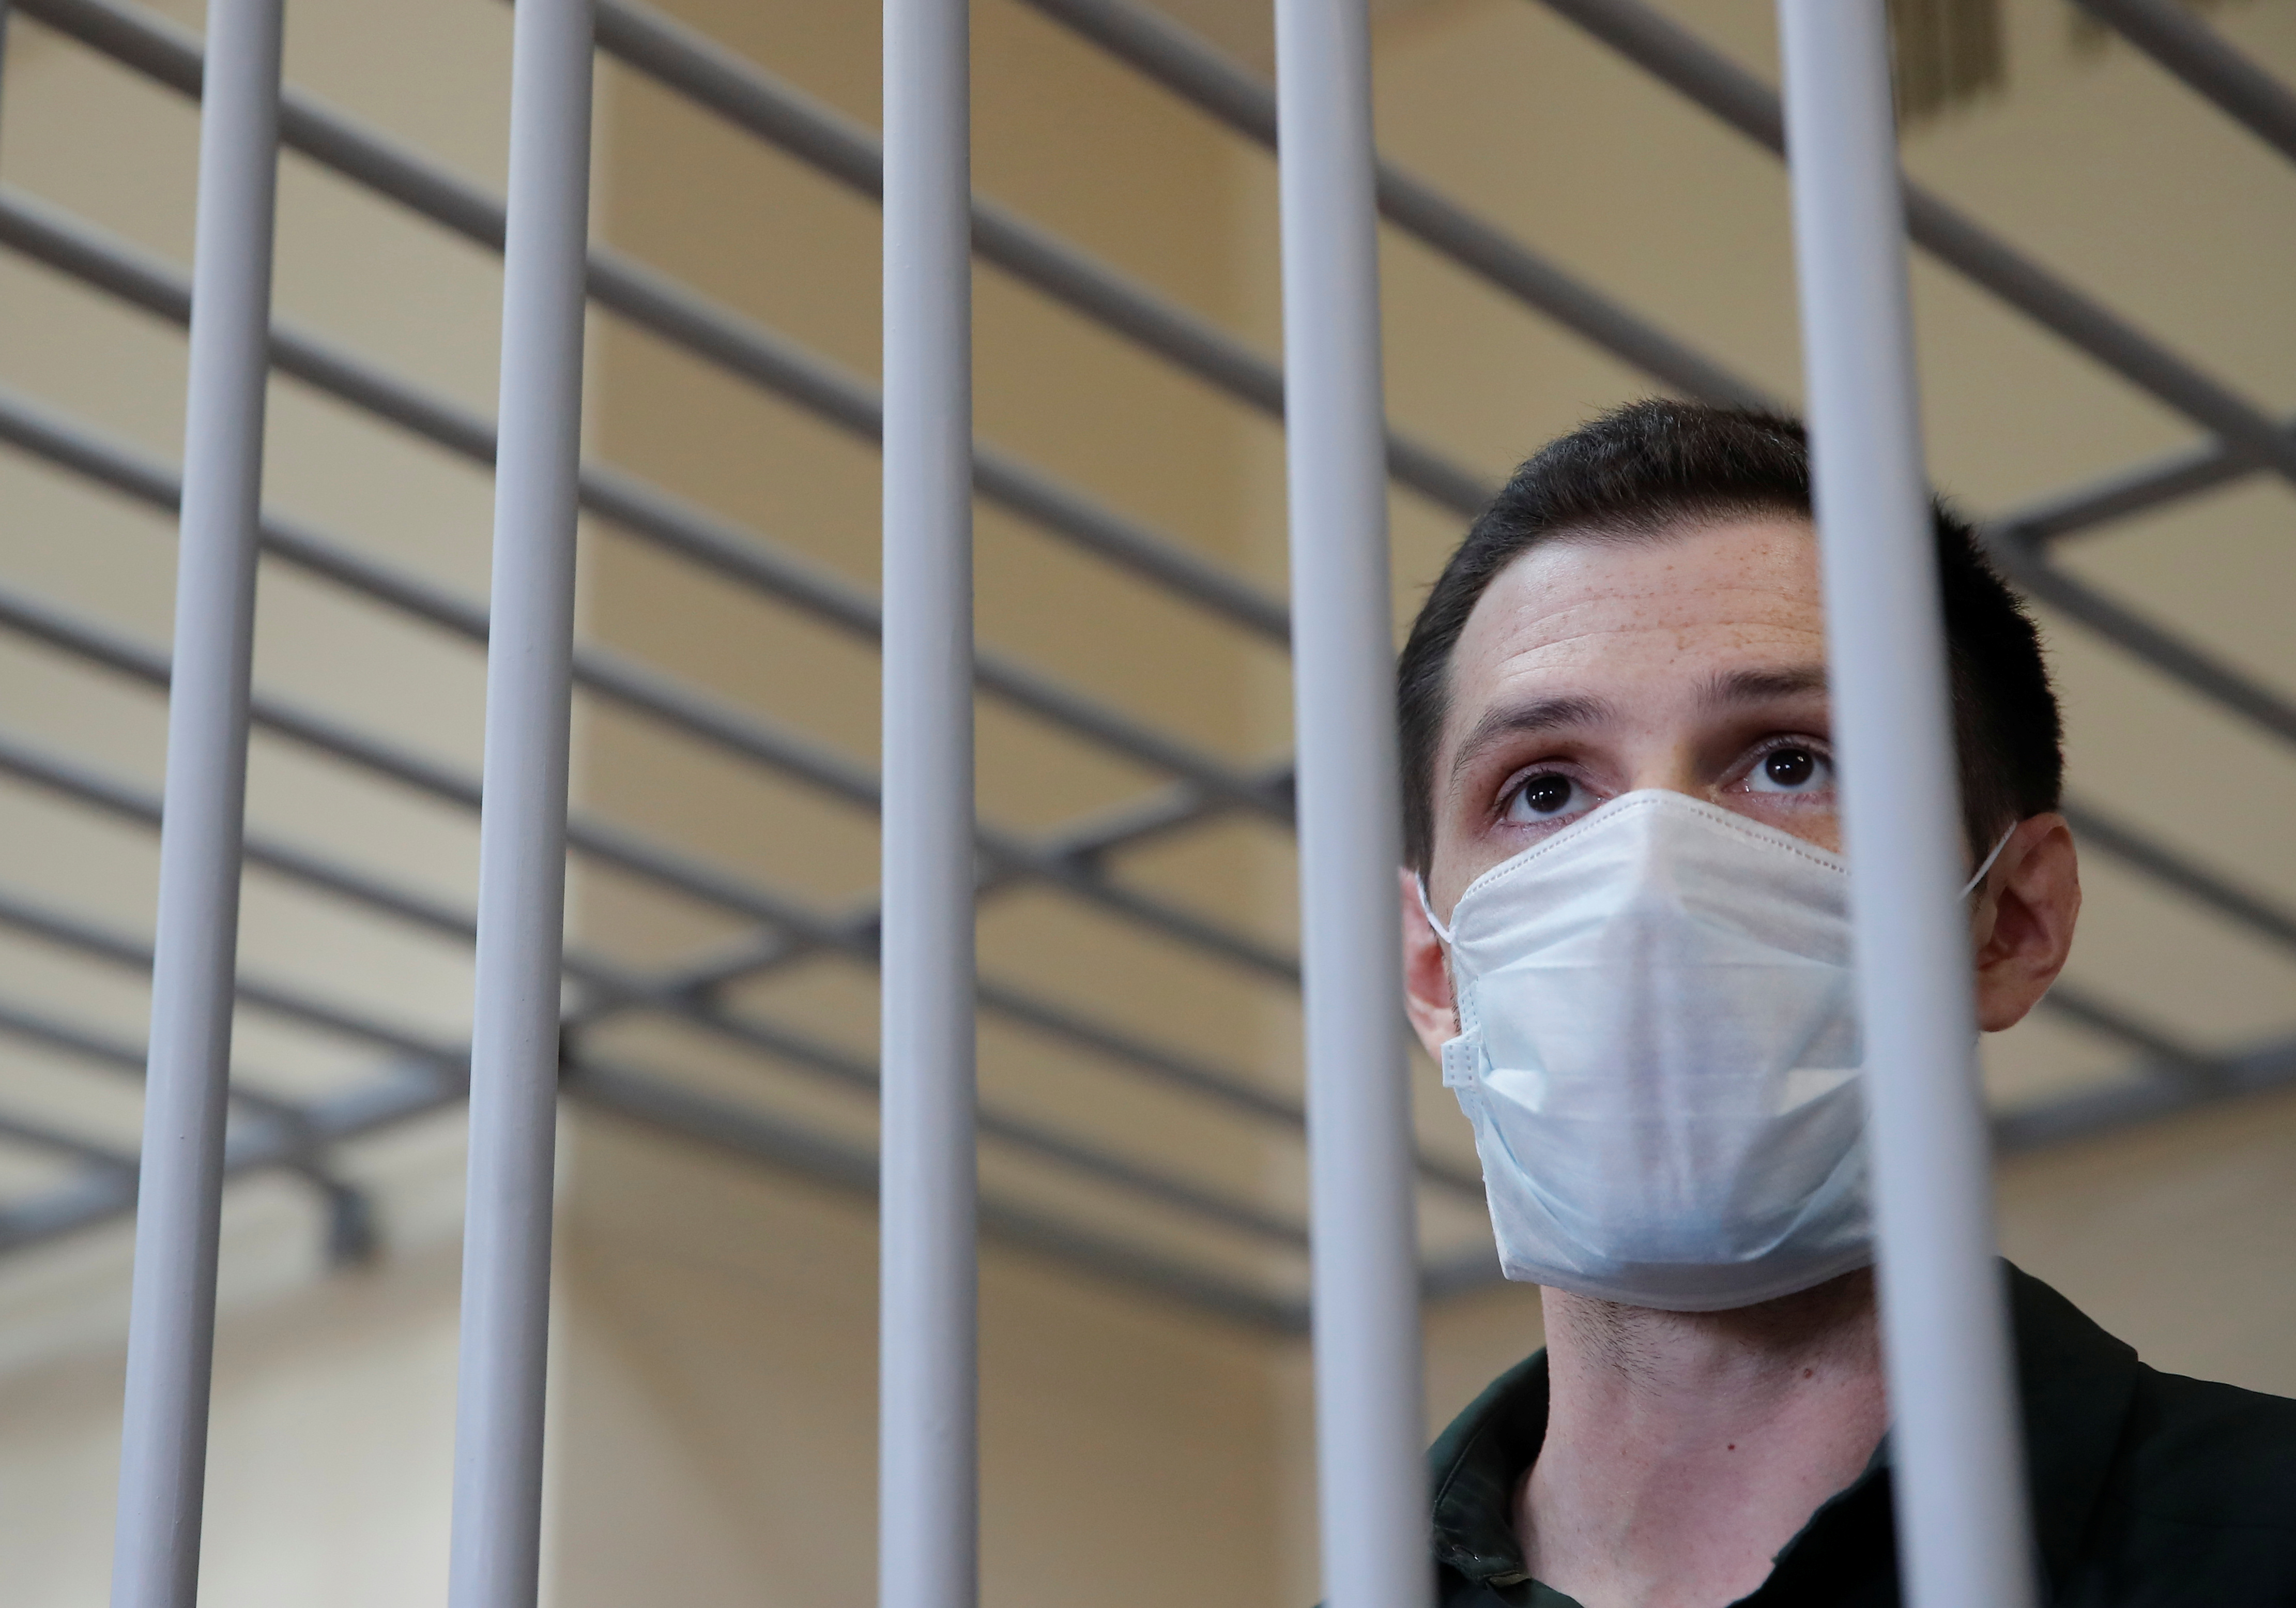 Former U.S. Marine Trevor Reed Begins Hunger Strike in Russian Solitary Confinement amid Fears he has Tuberculosis